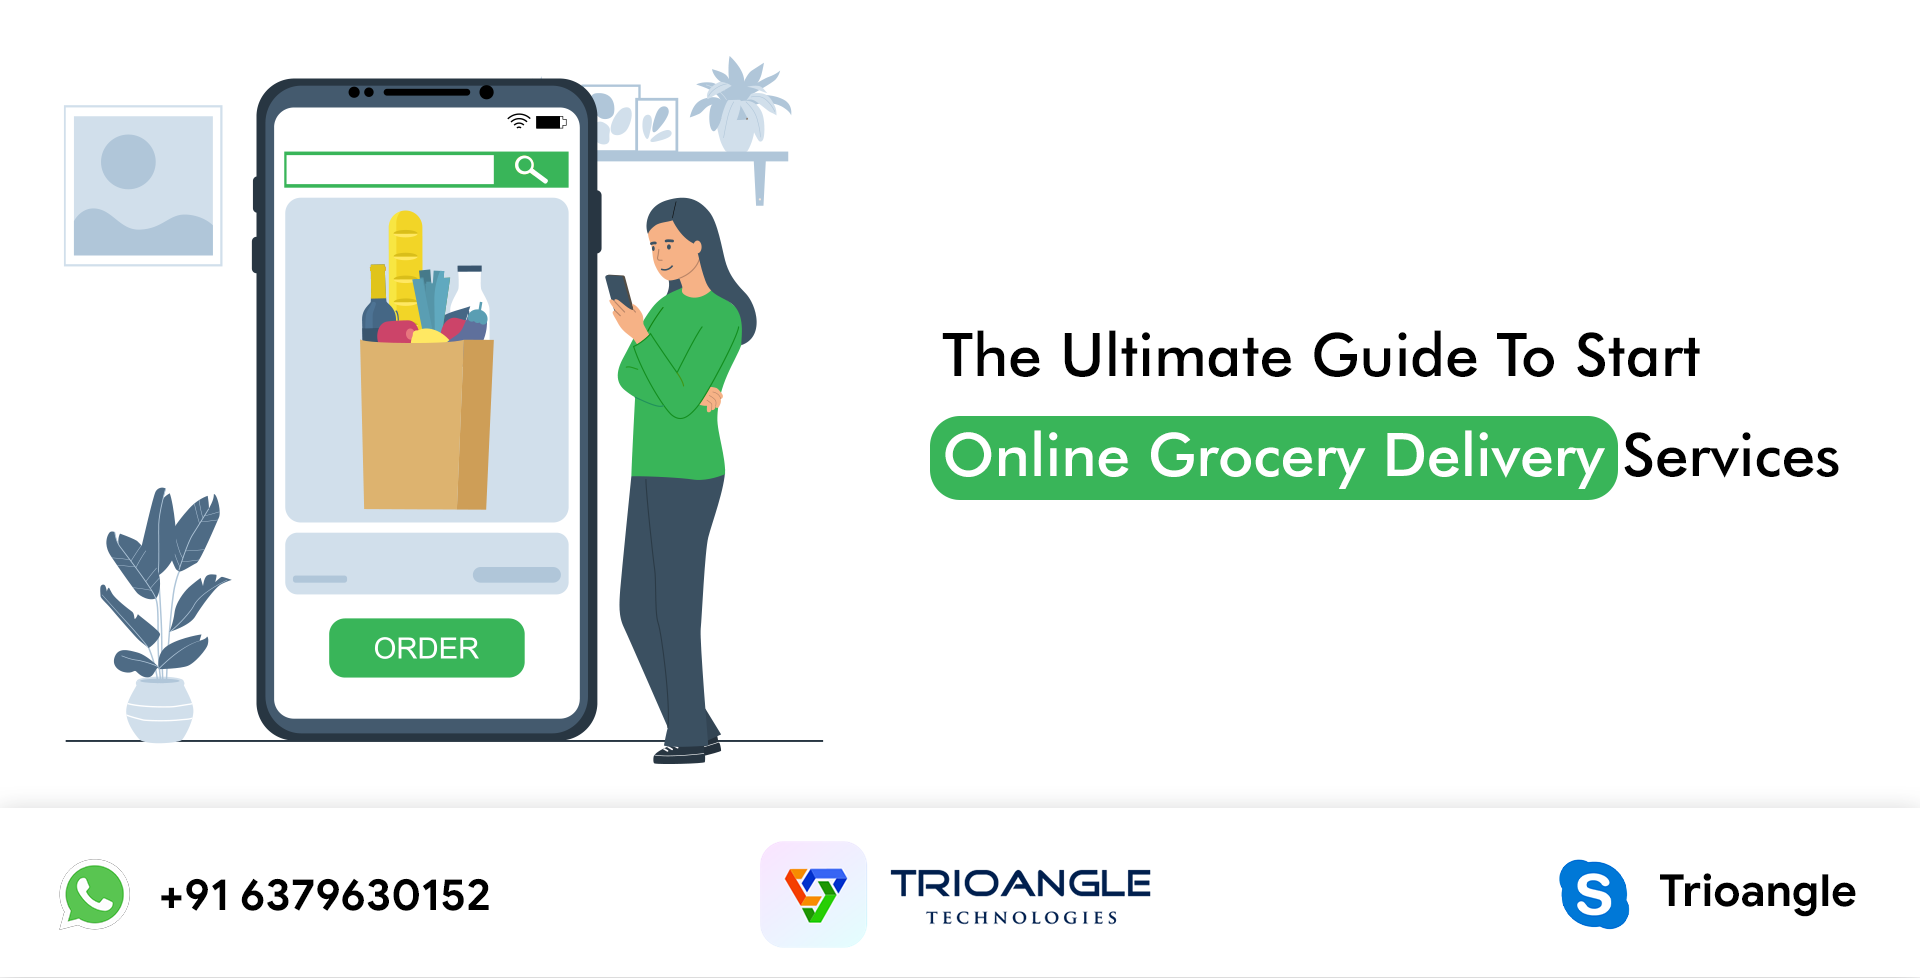 The Ultimate Guide To Start Online Grocery Delivery Services